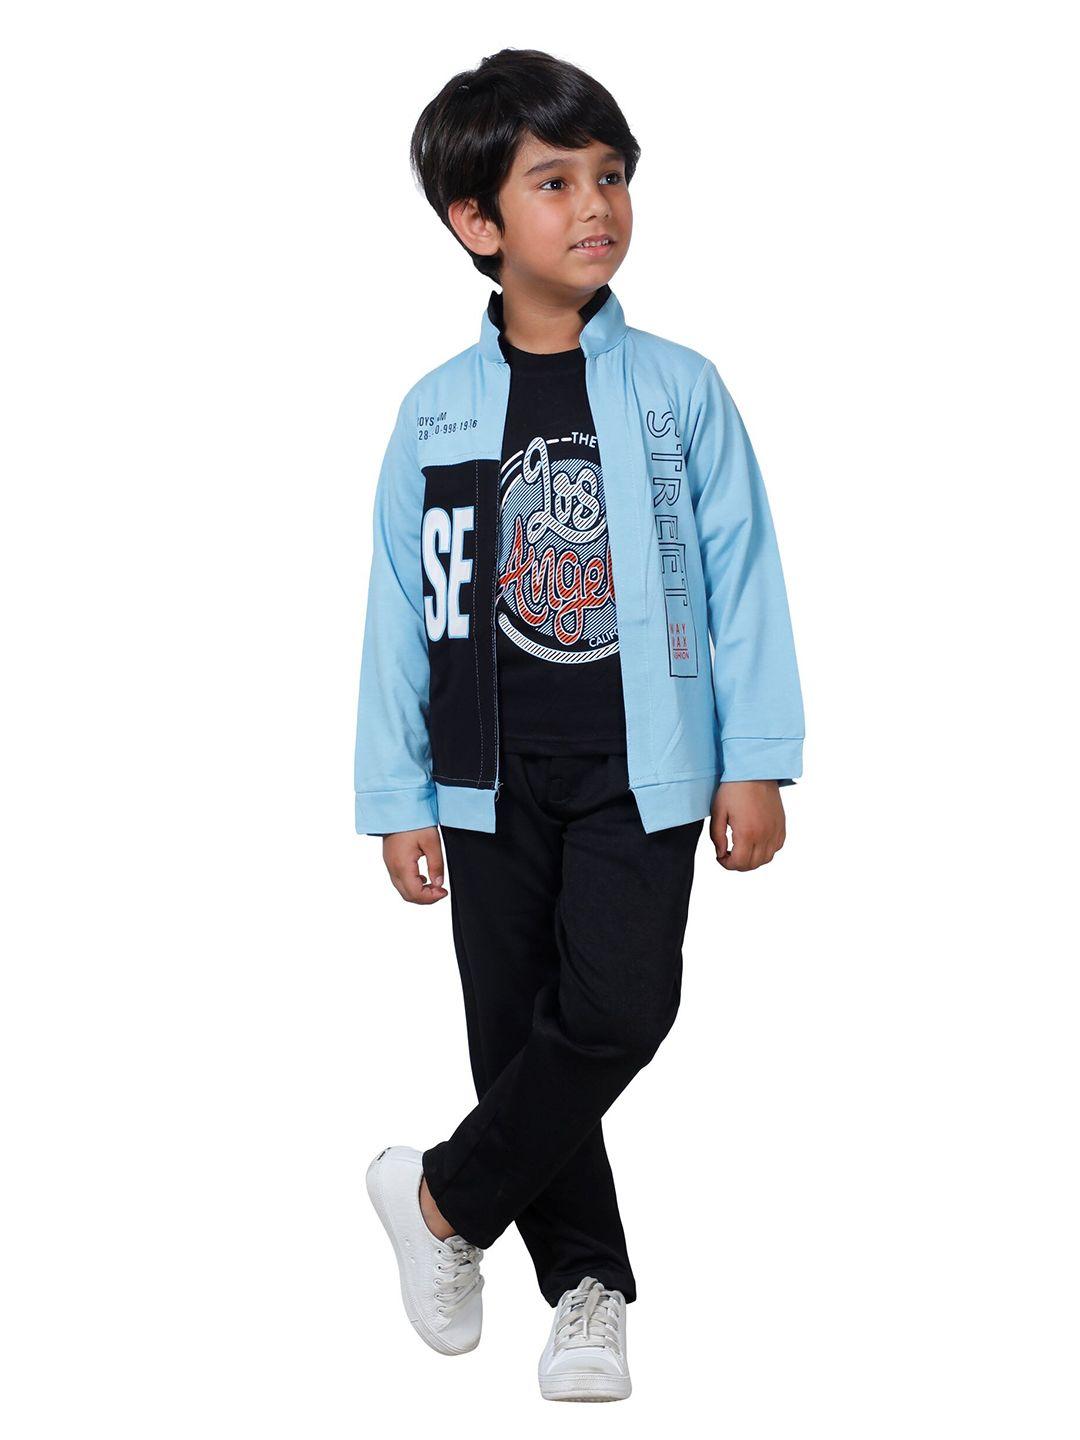 dkgf fashion boys blue & black printed t-shirt with trousers